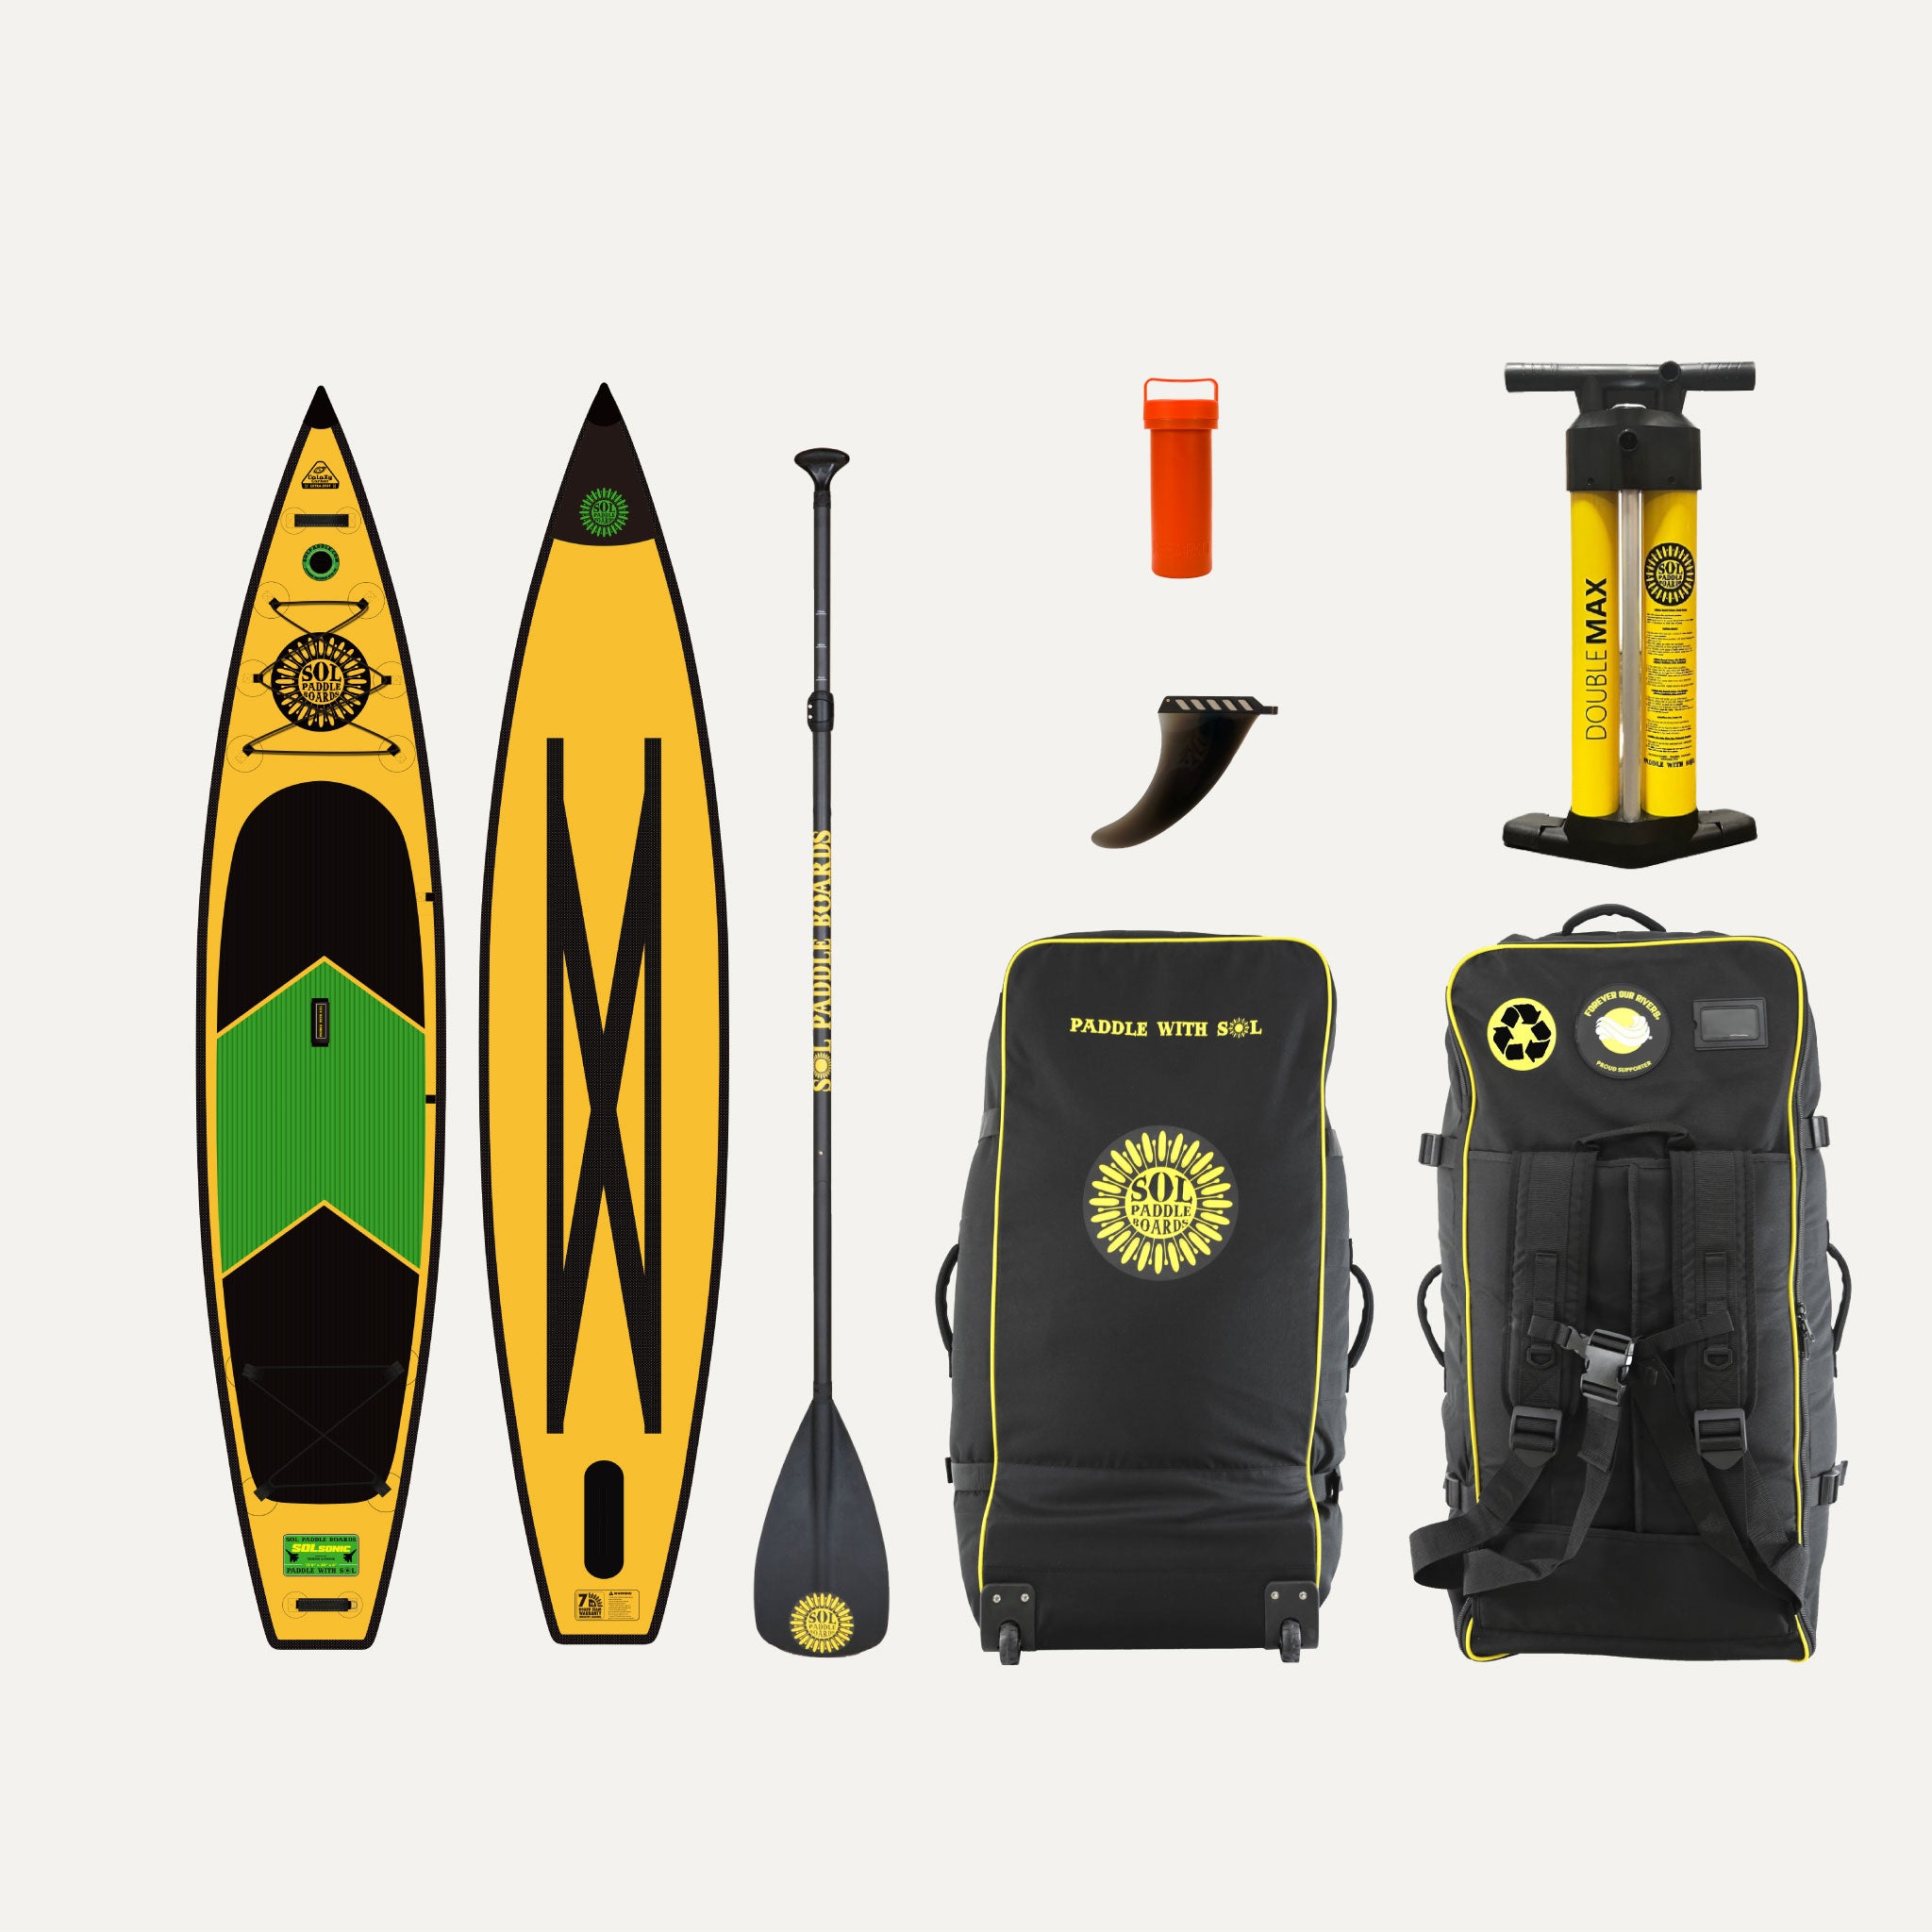 Carbon GalaXy SOLsonic Inflatable Paddle Board showcasing the top and bottom views of the SUP board and the accessories that come with it